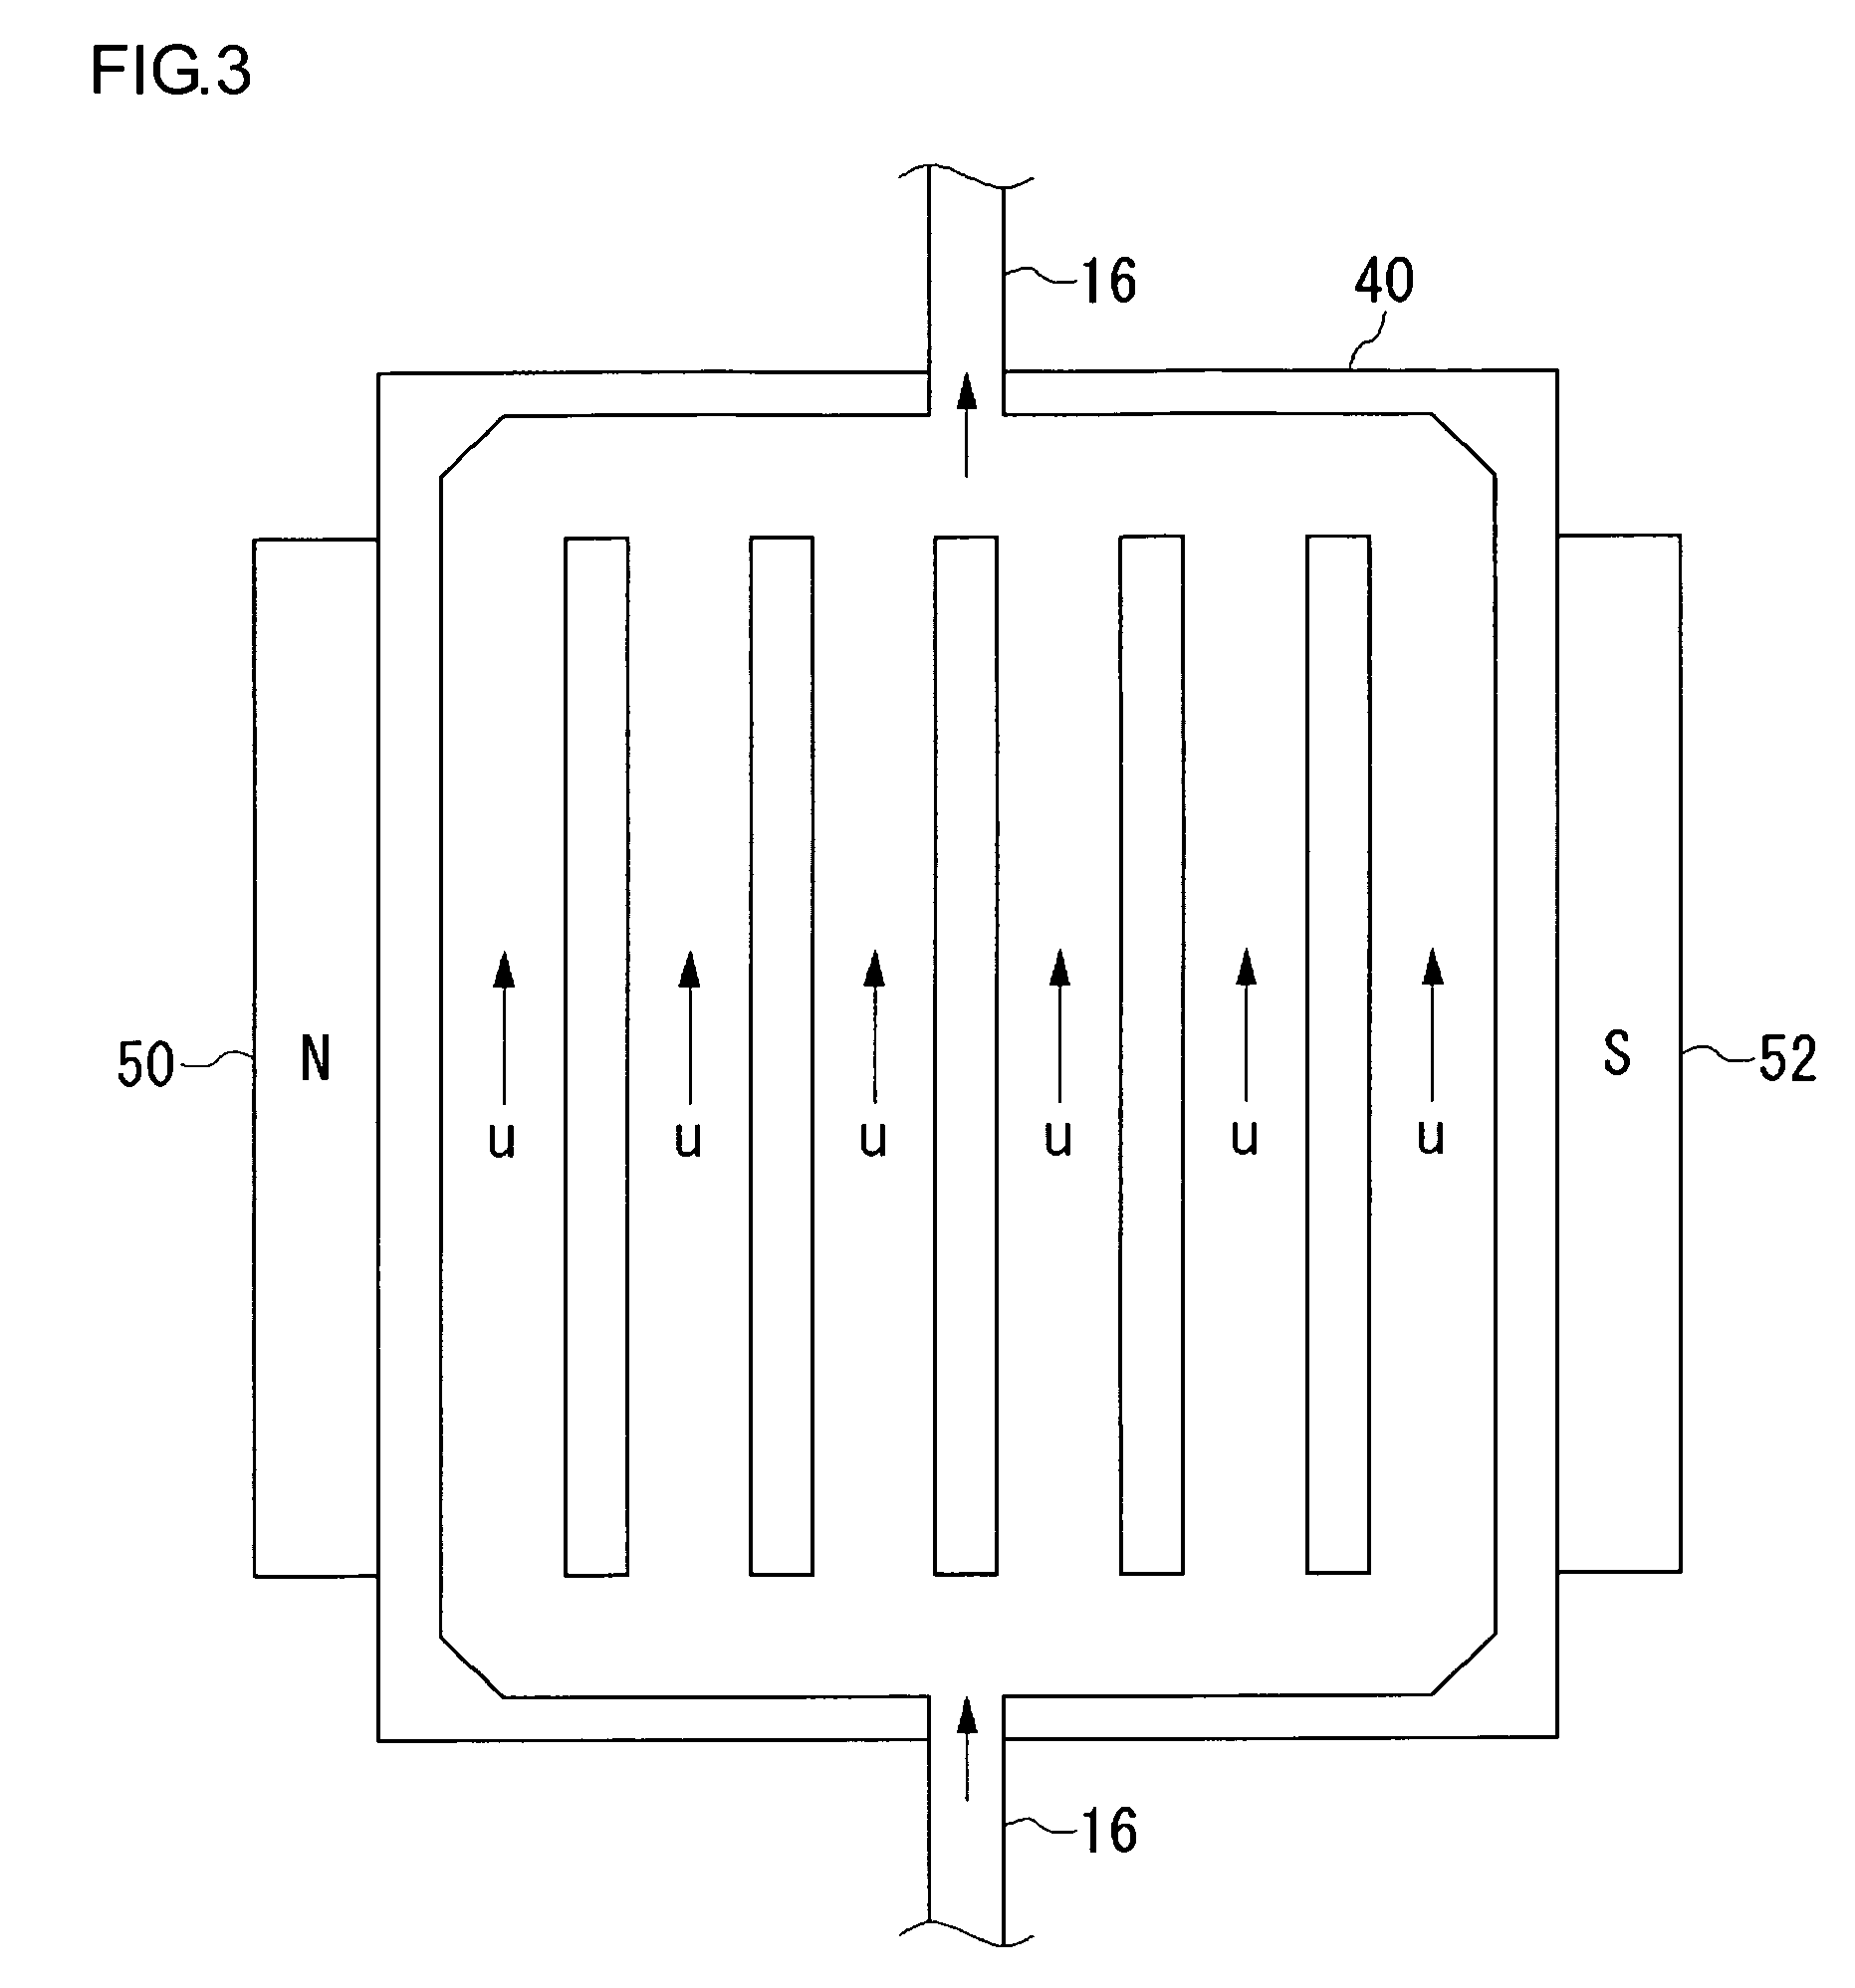 Power supply system employing conductive fluid